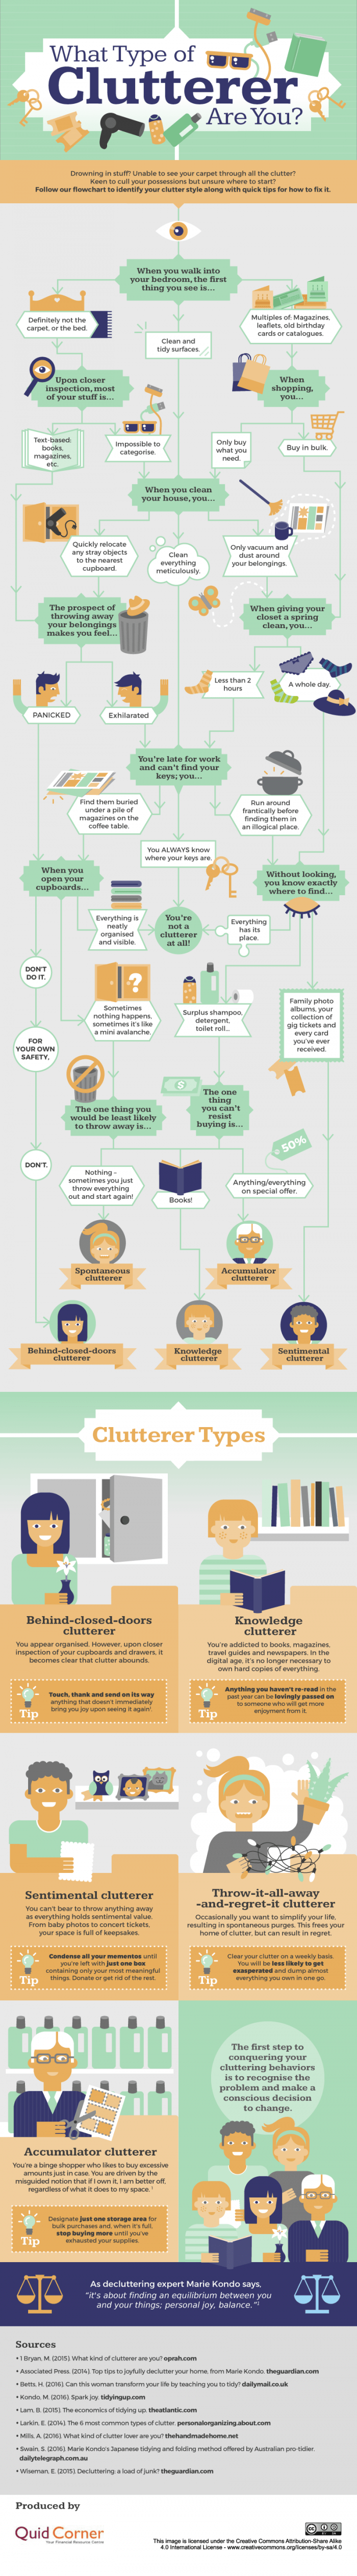 What Type of Clutterer Are You?